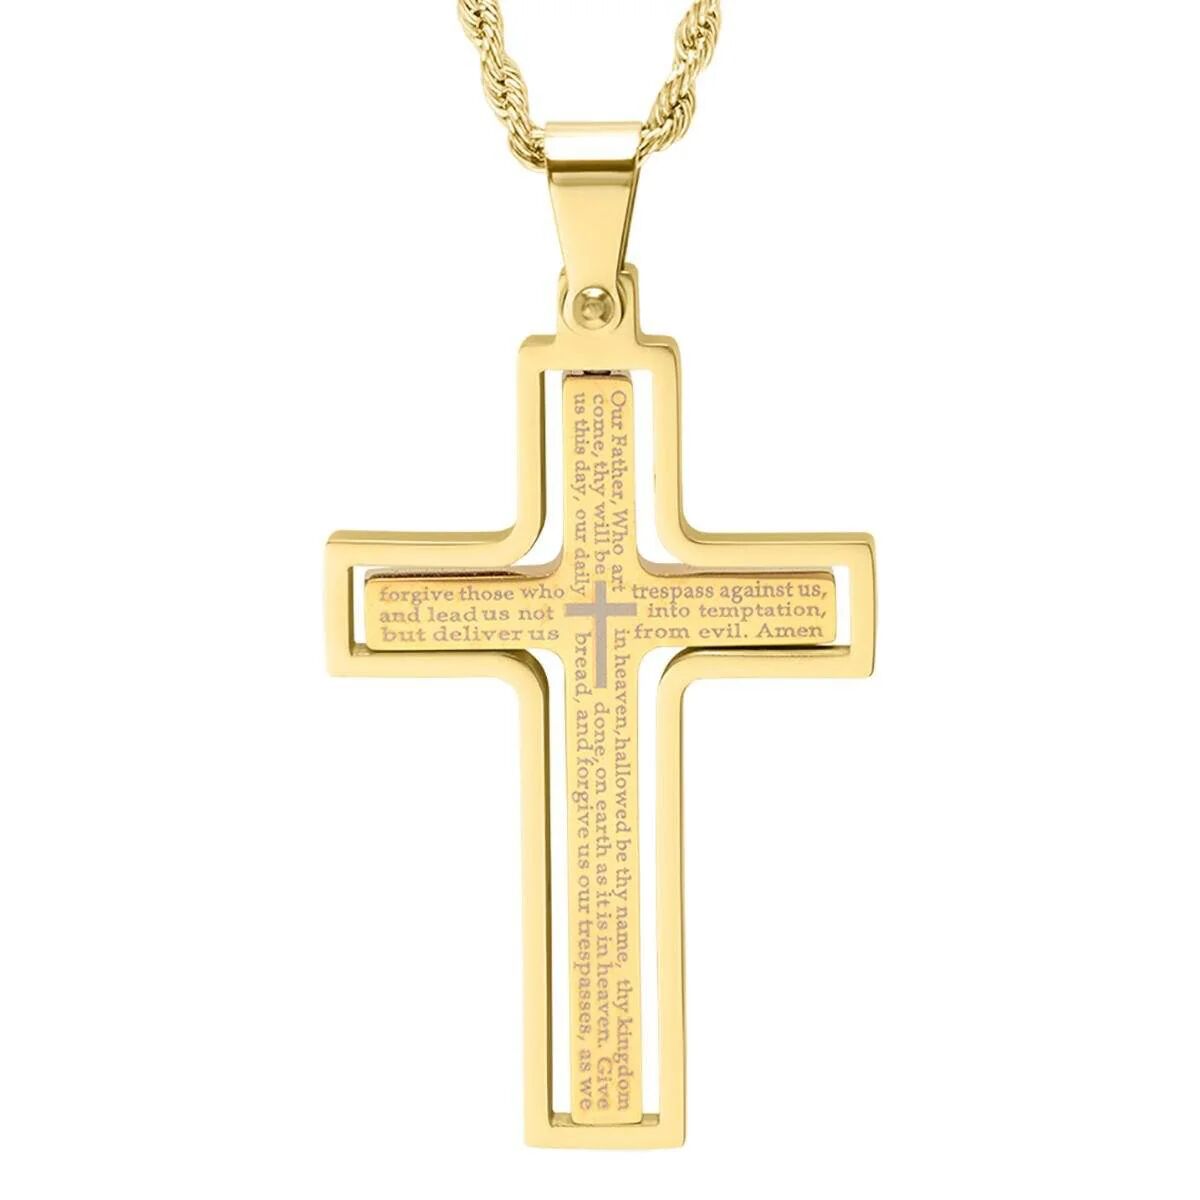 DailySale Men's Stainless Steel The Lord's Prayer Rotating Cross Pendant Necklace